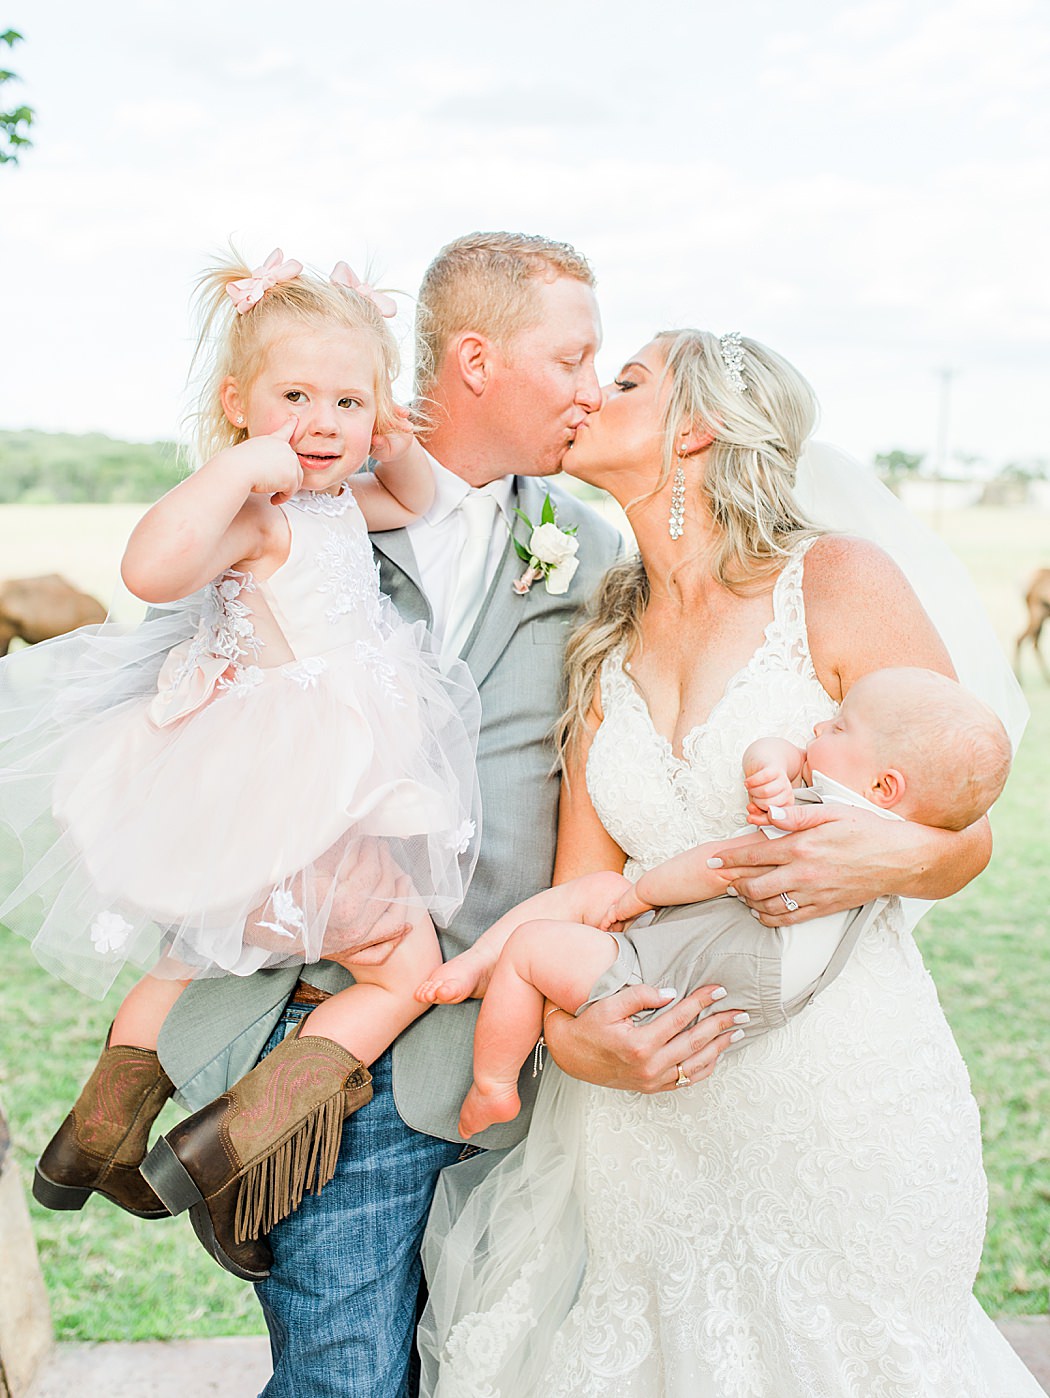 Summer Wedding at The Lodge at Country Inn Cottages in Fredericksburg Texas by Allison Jeffers Photography 0087